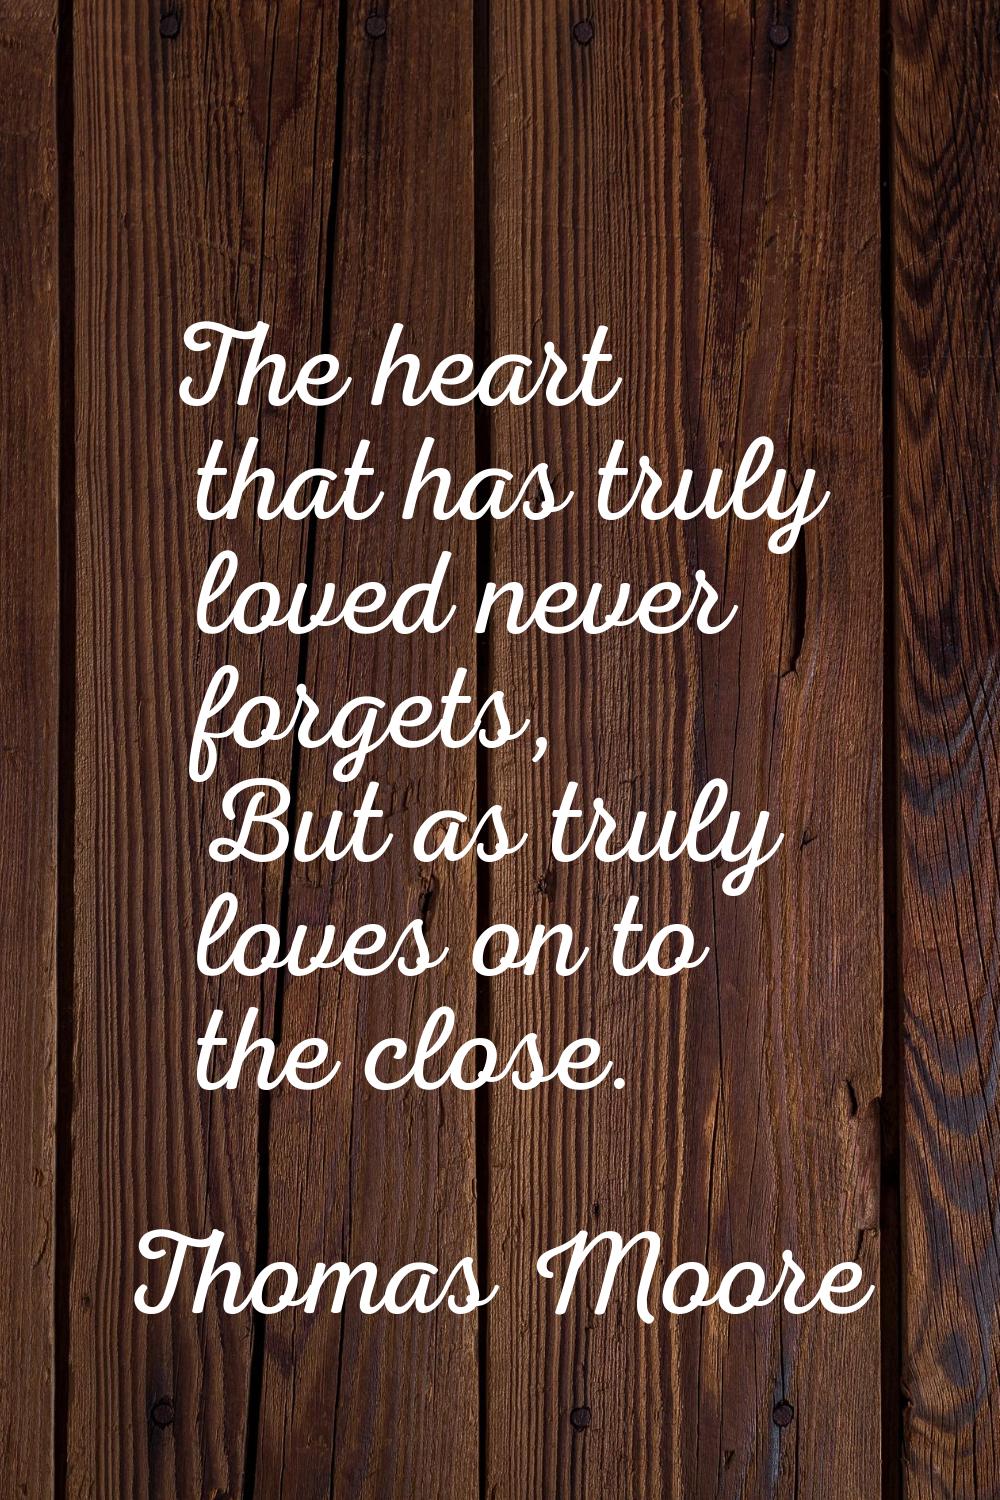 The heart that has truly loved never forgets, But as truly loves on to the close.